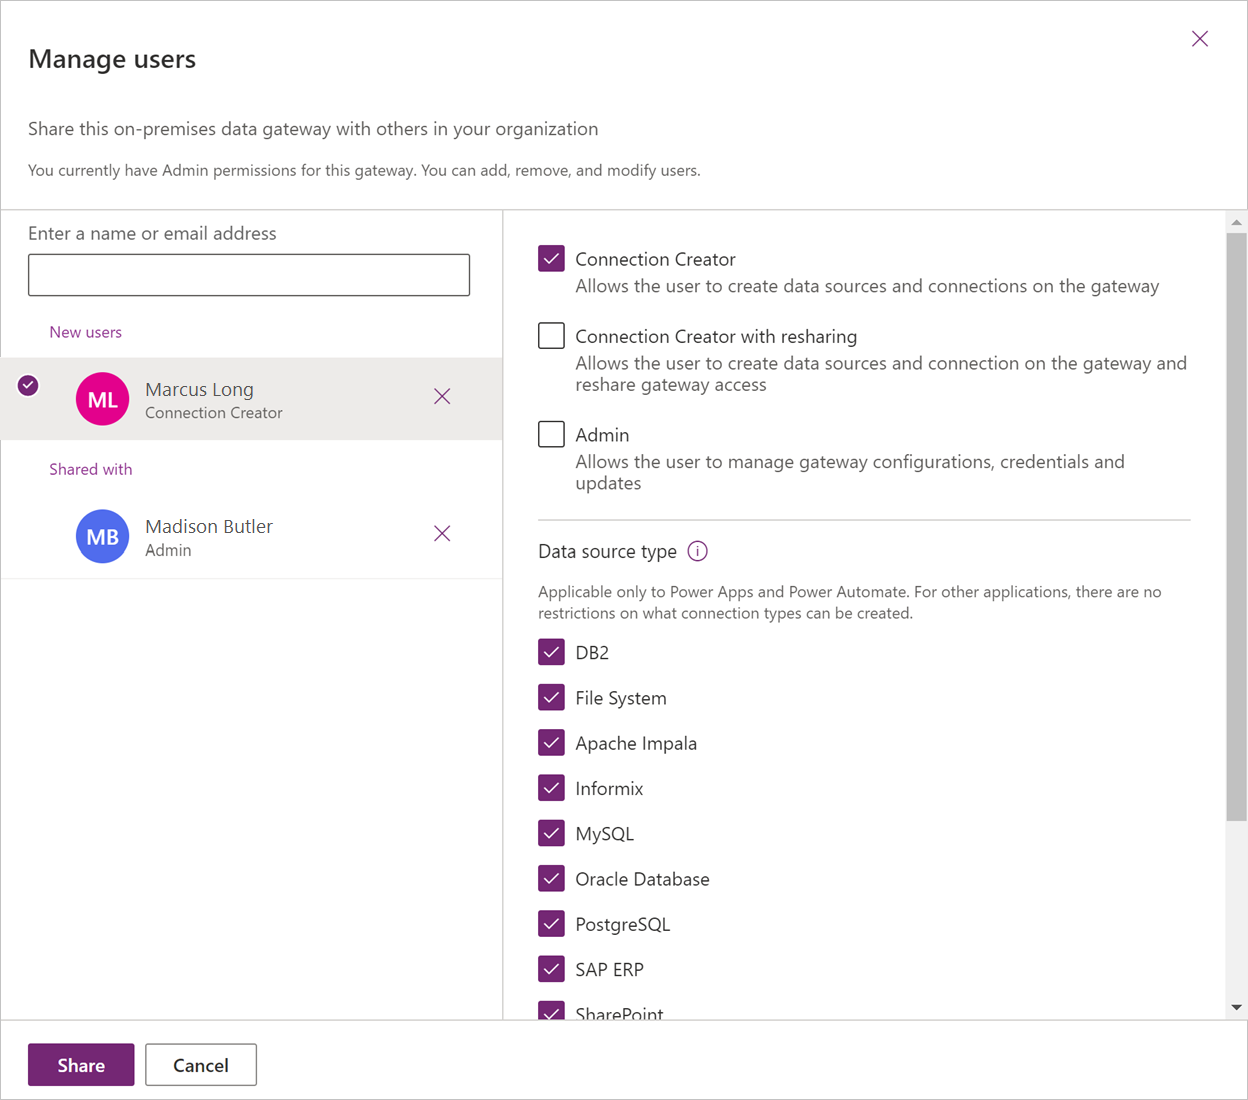 Image of the Manage users dialog box, with a new user emphasized, the Connection Creator role selected, and multiple data sources selected.